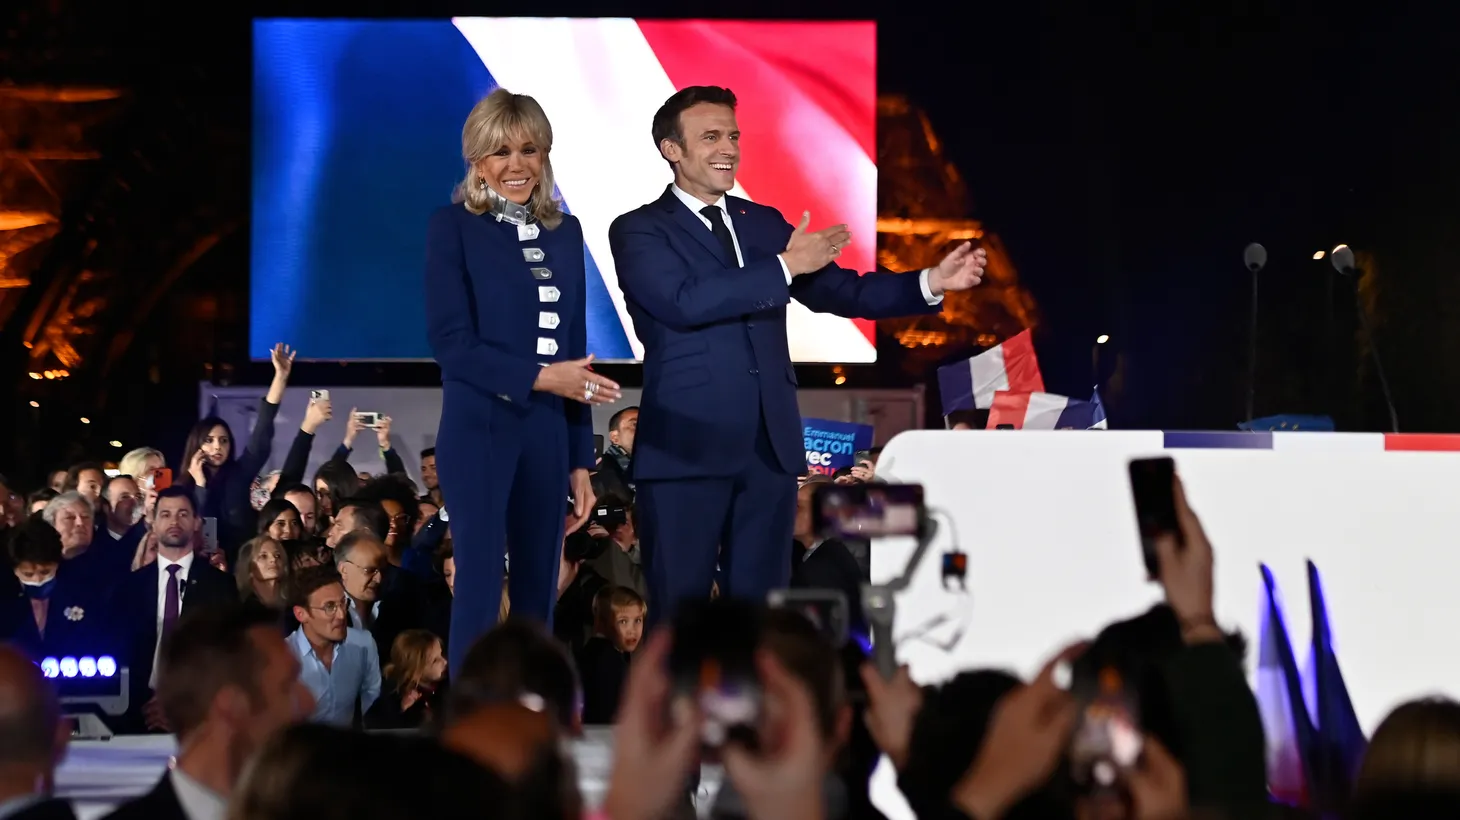 Emmanuel Macron and his wife Brigitte Macron celebrate after his victory in France's presidential election, at the Champ de Mars in Paris, April 25, 2022.